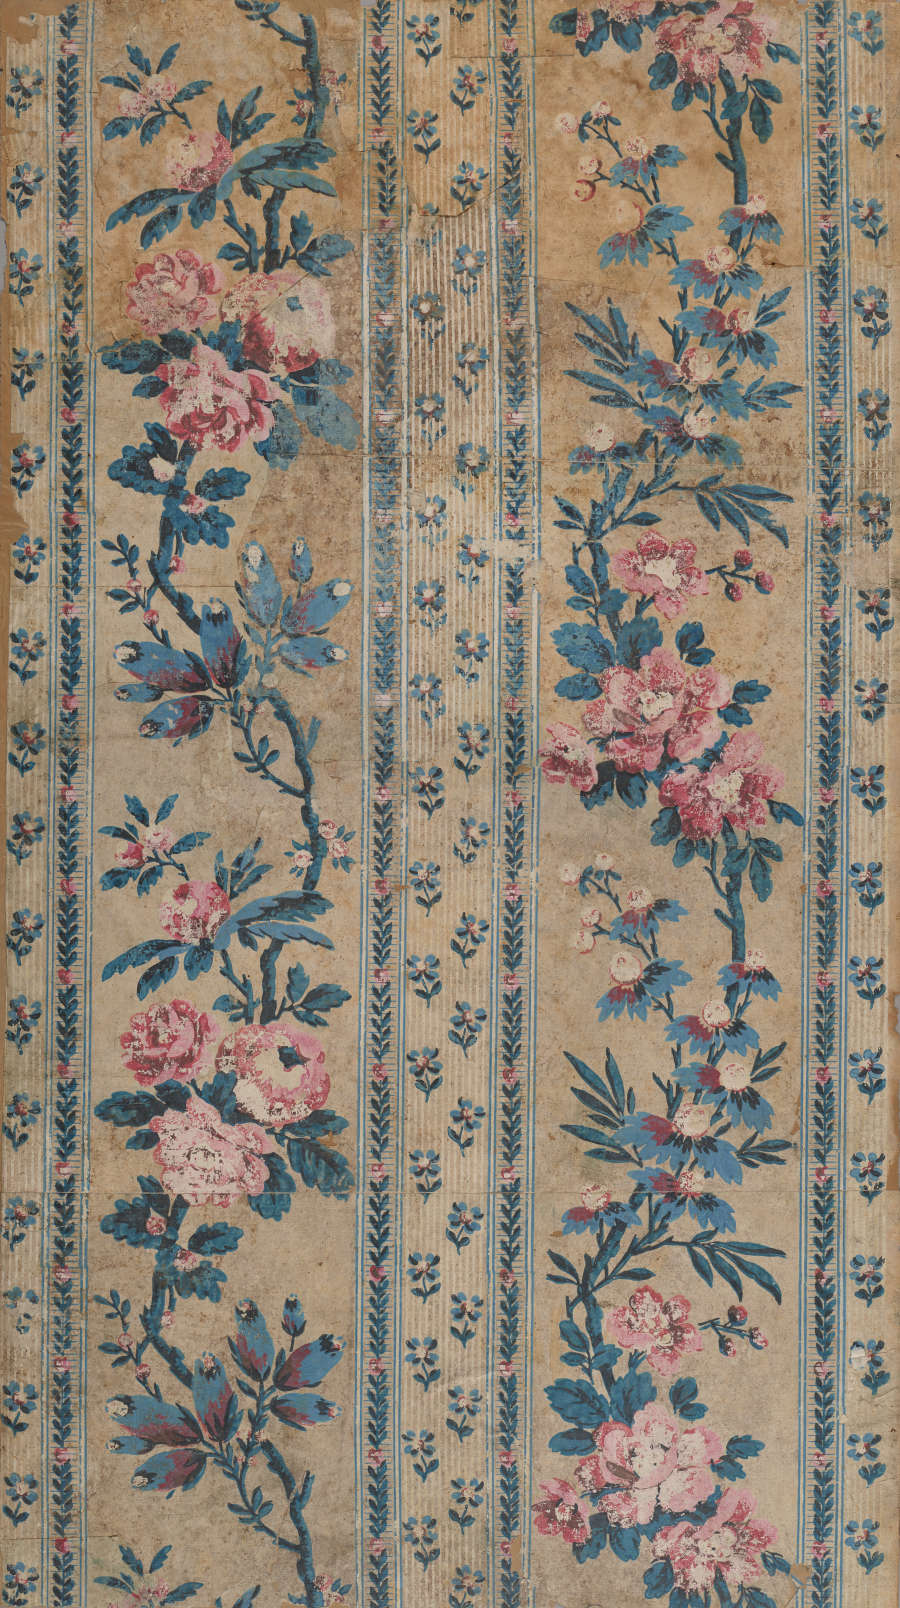 Panel of vintage fabric wallpaper featuring vertically aligned, faded pink and blue garlands alongside patterned columns of small floral motifs. The design is set on a mottled beige background.